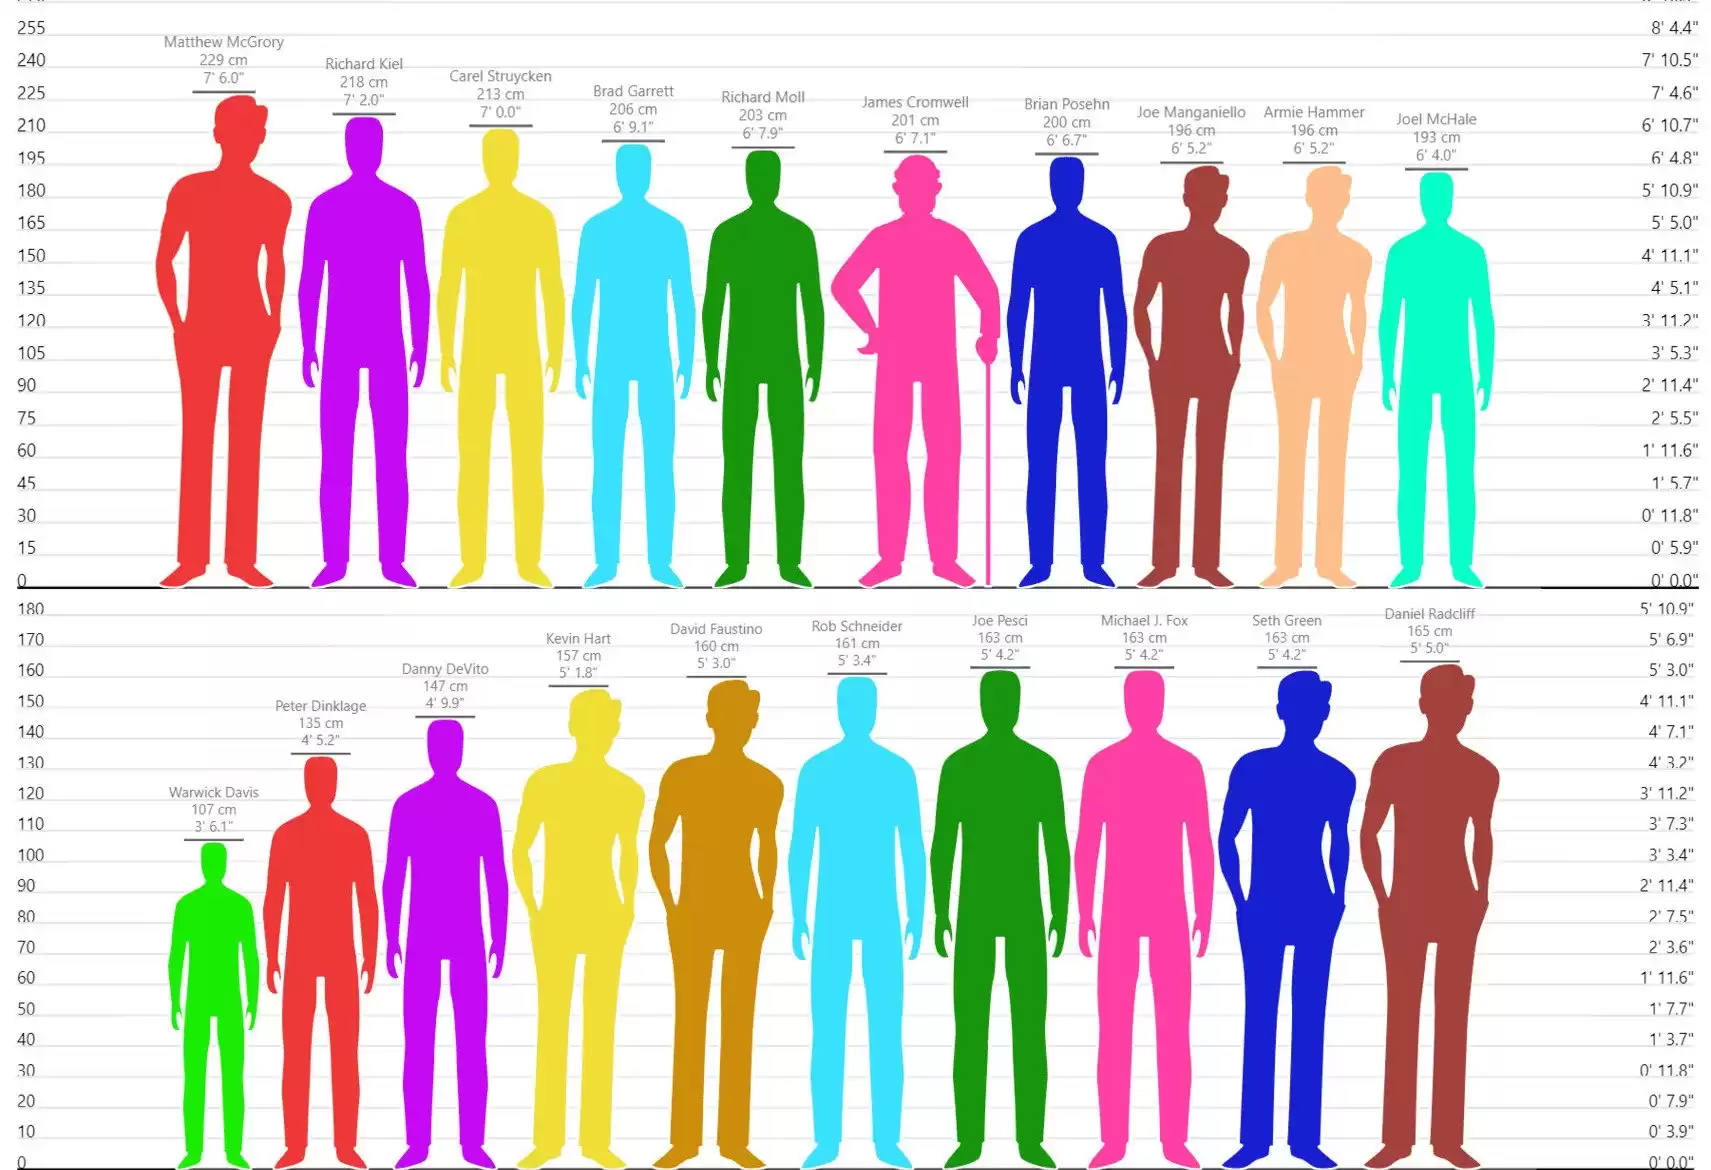 Hollywood's Height Extremes - Height Comparison